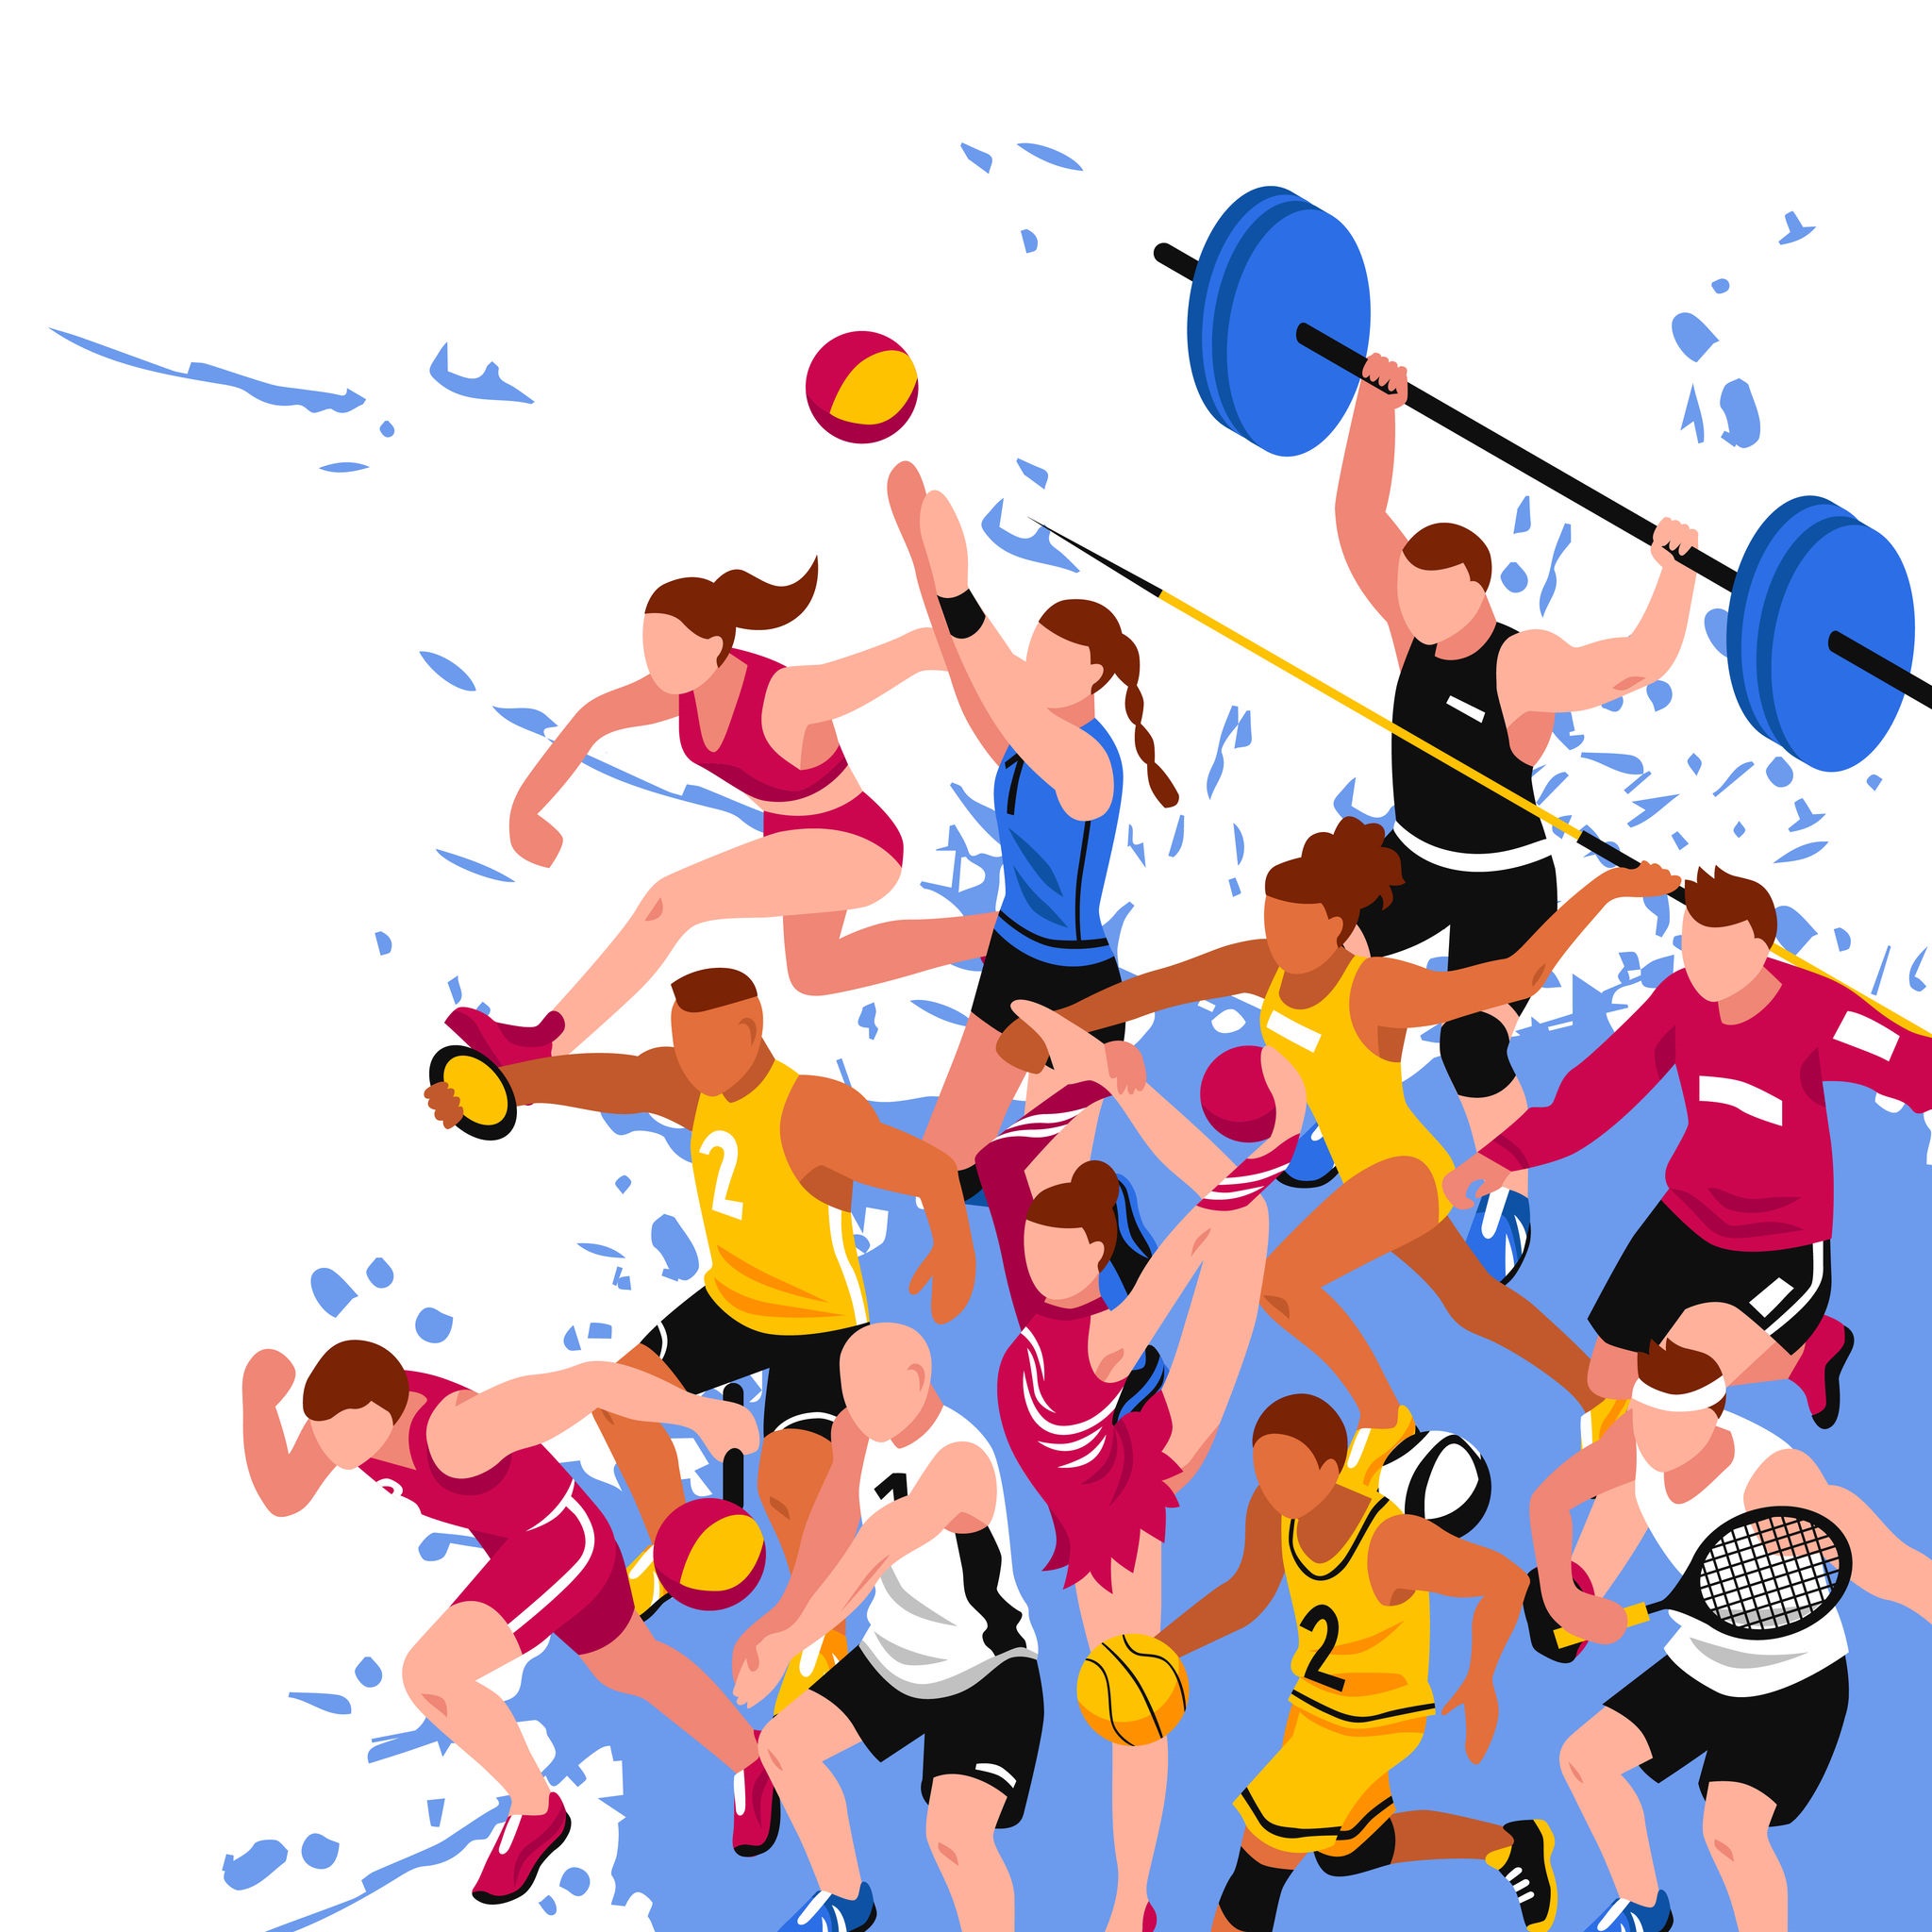 Illustrated image of people playing different sports